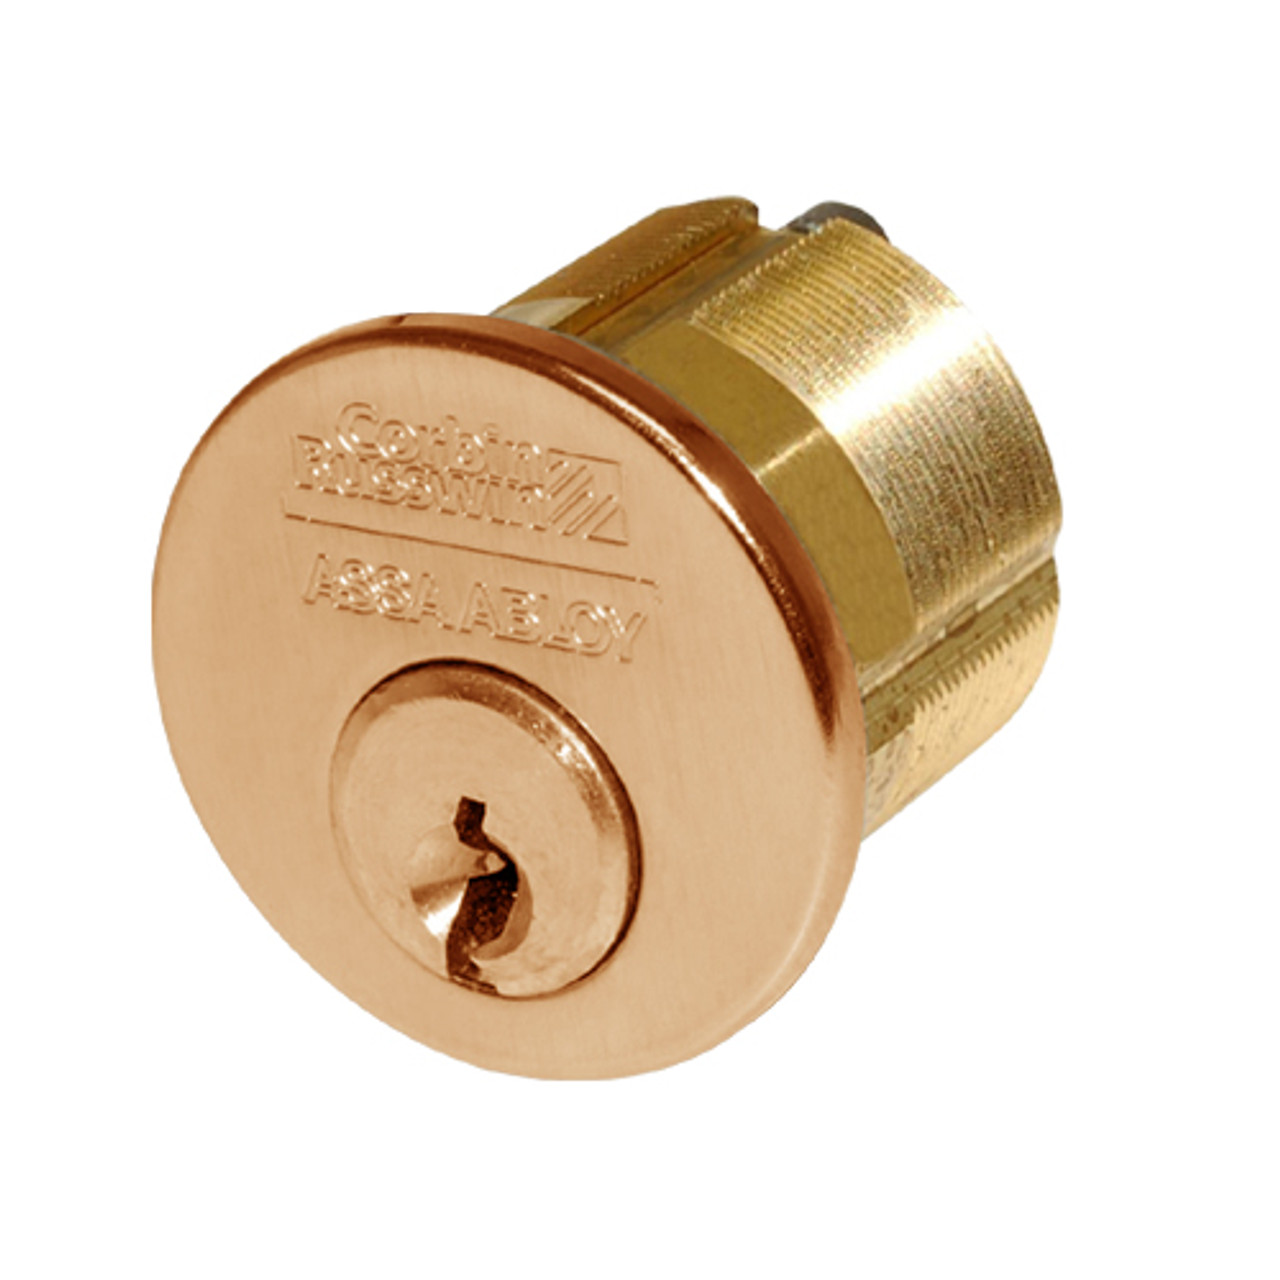 CR1000-134-A02-6-59A1-612 Corbin Conventional Mortise Cylinder for Mortise Lock and DL3000 Deadlocks with Straight Cam in Satin Bronze Finish